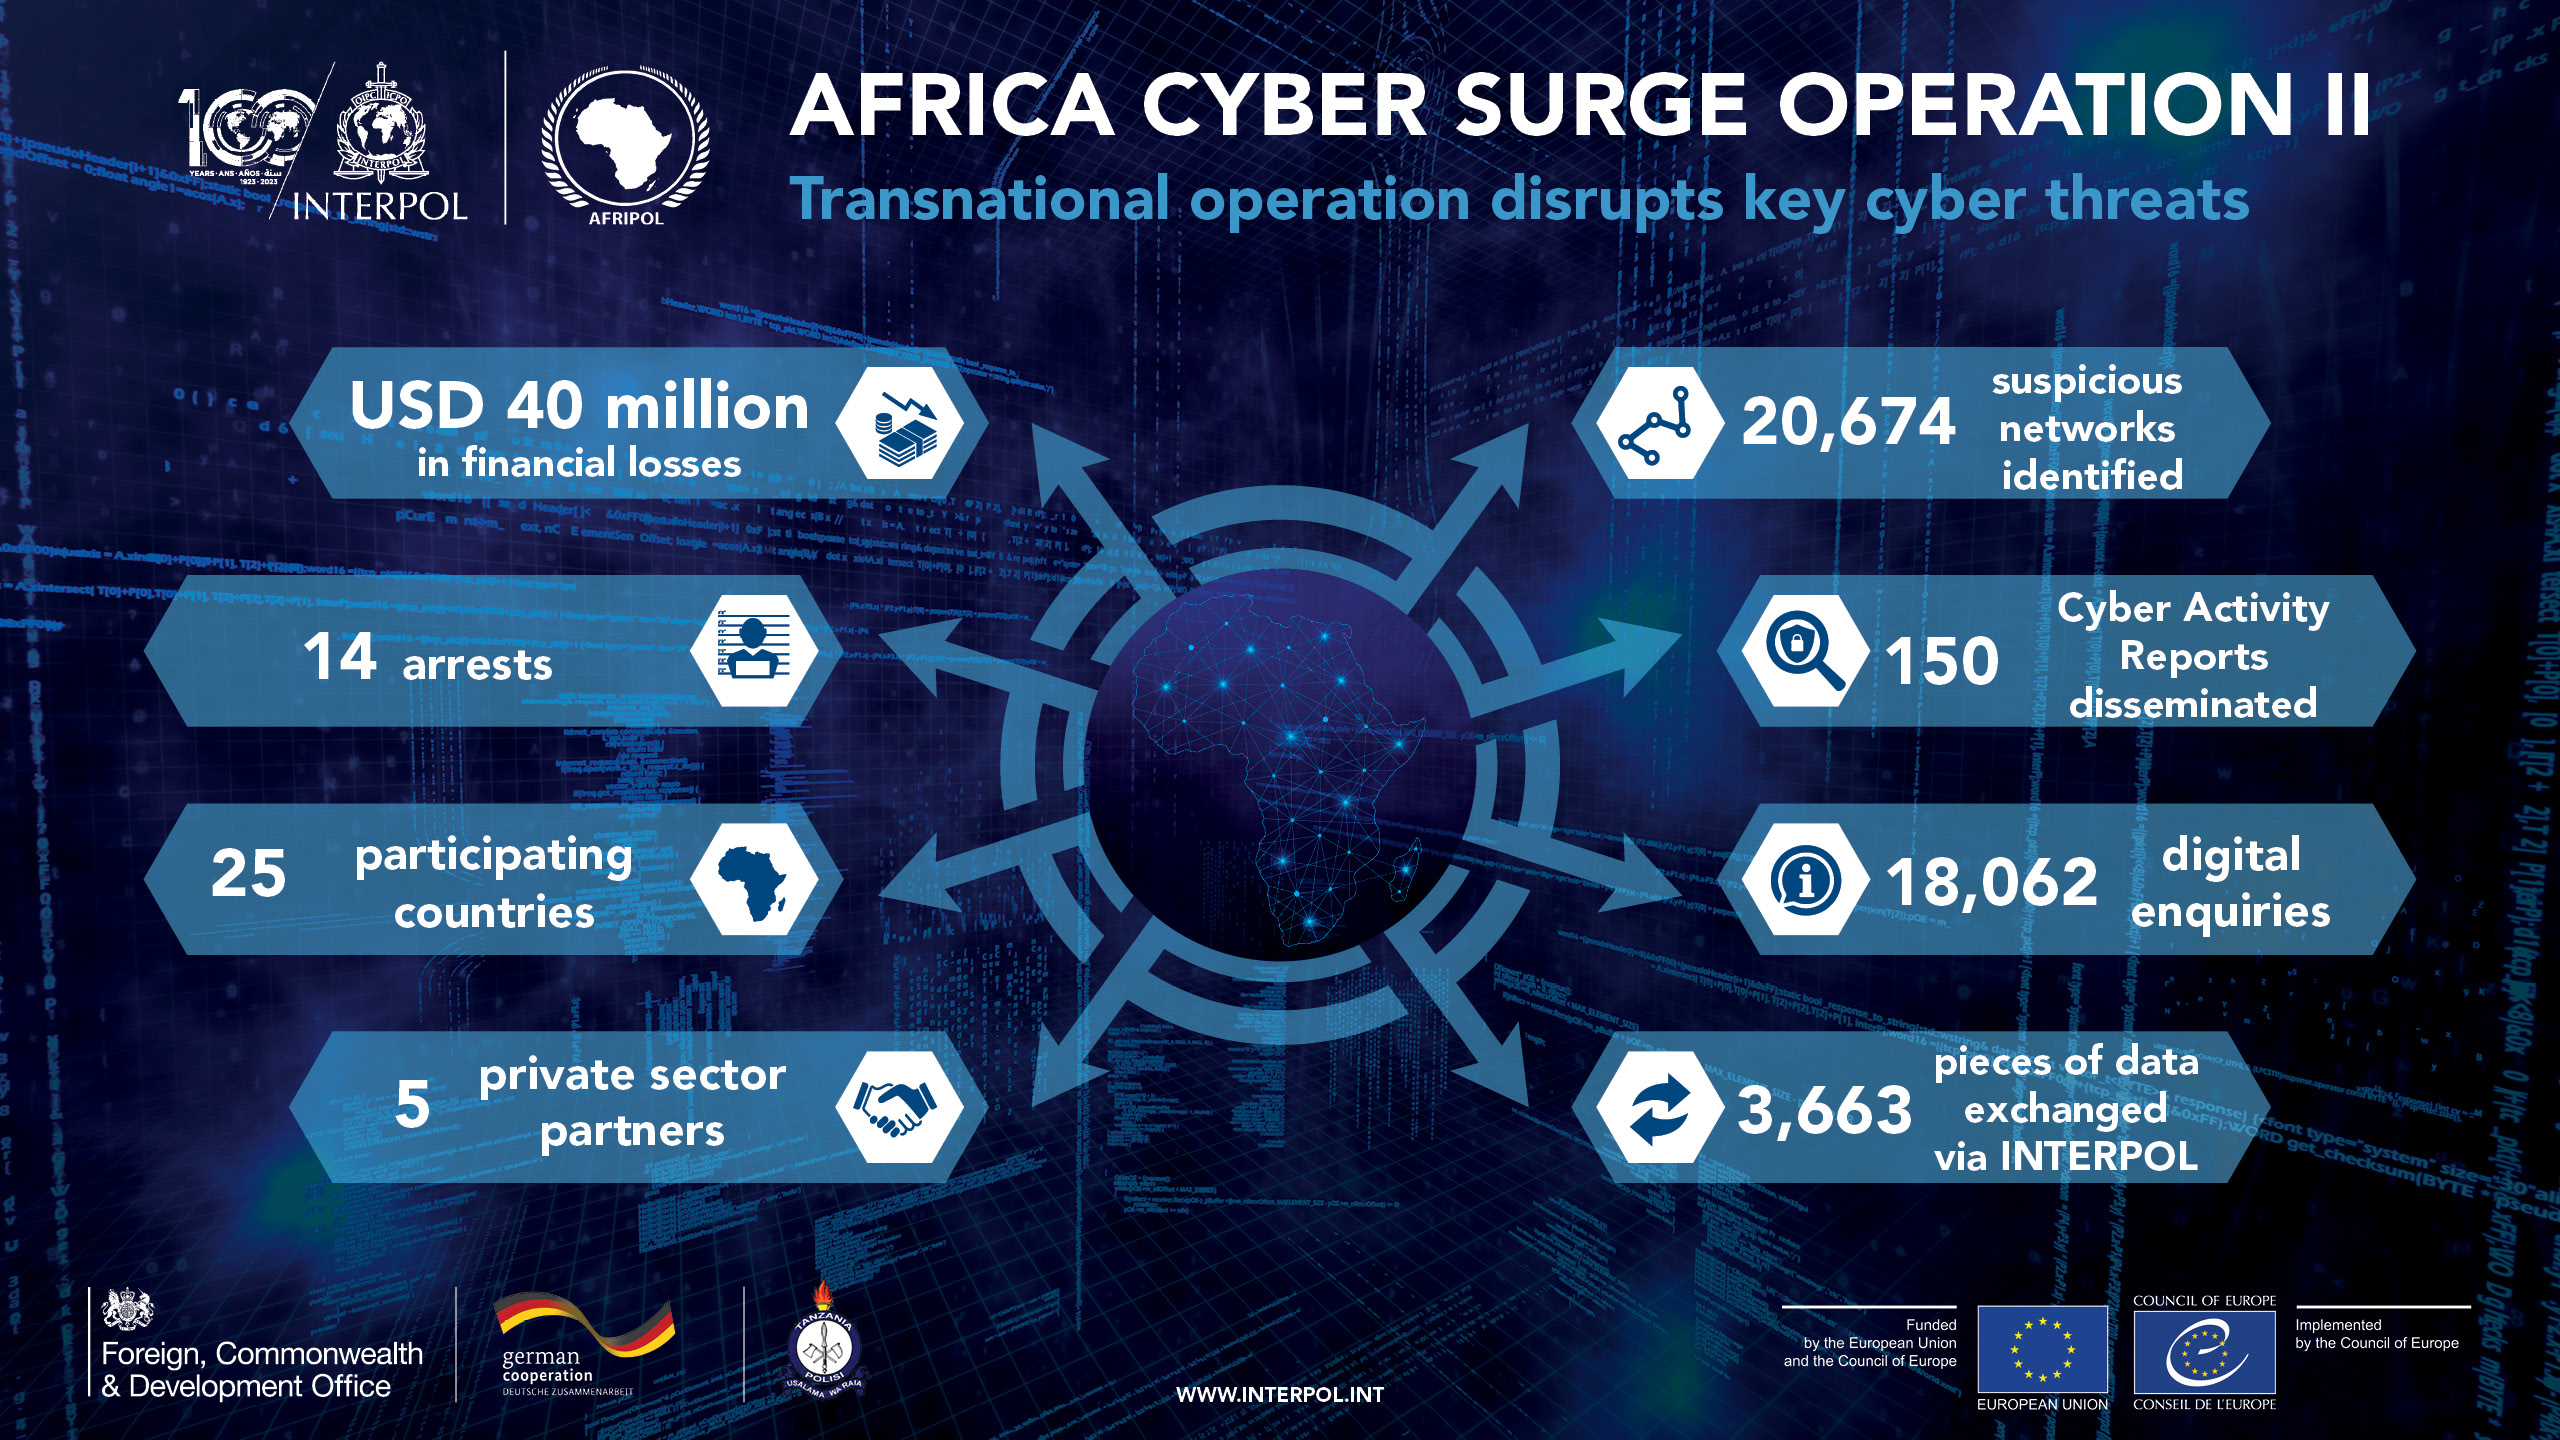 Cybercrime: 14 arrests, thousands of illicit cyber networks disrupted in Africa operation